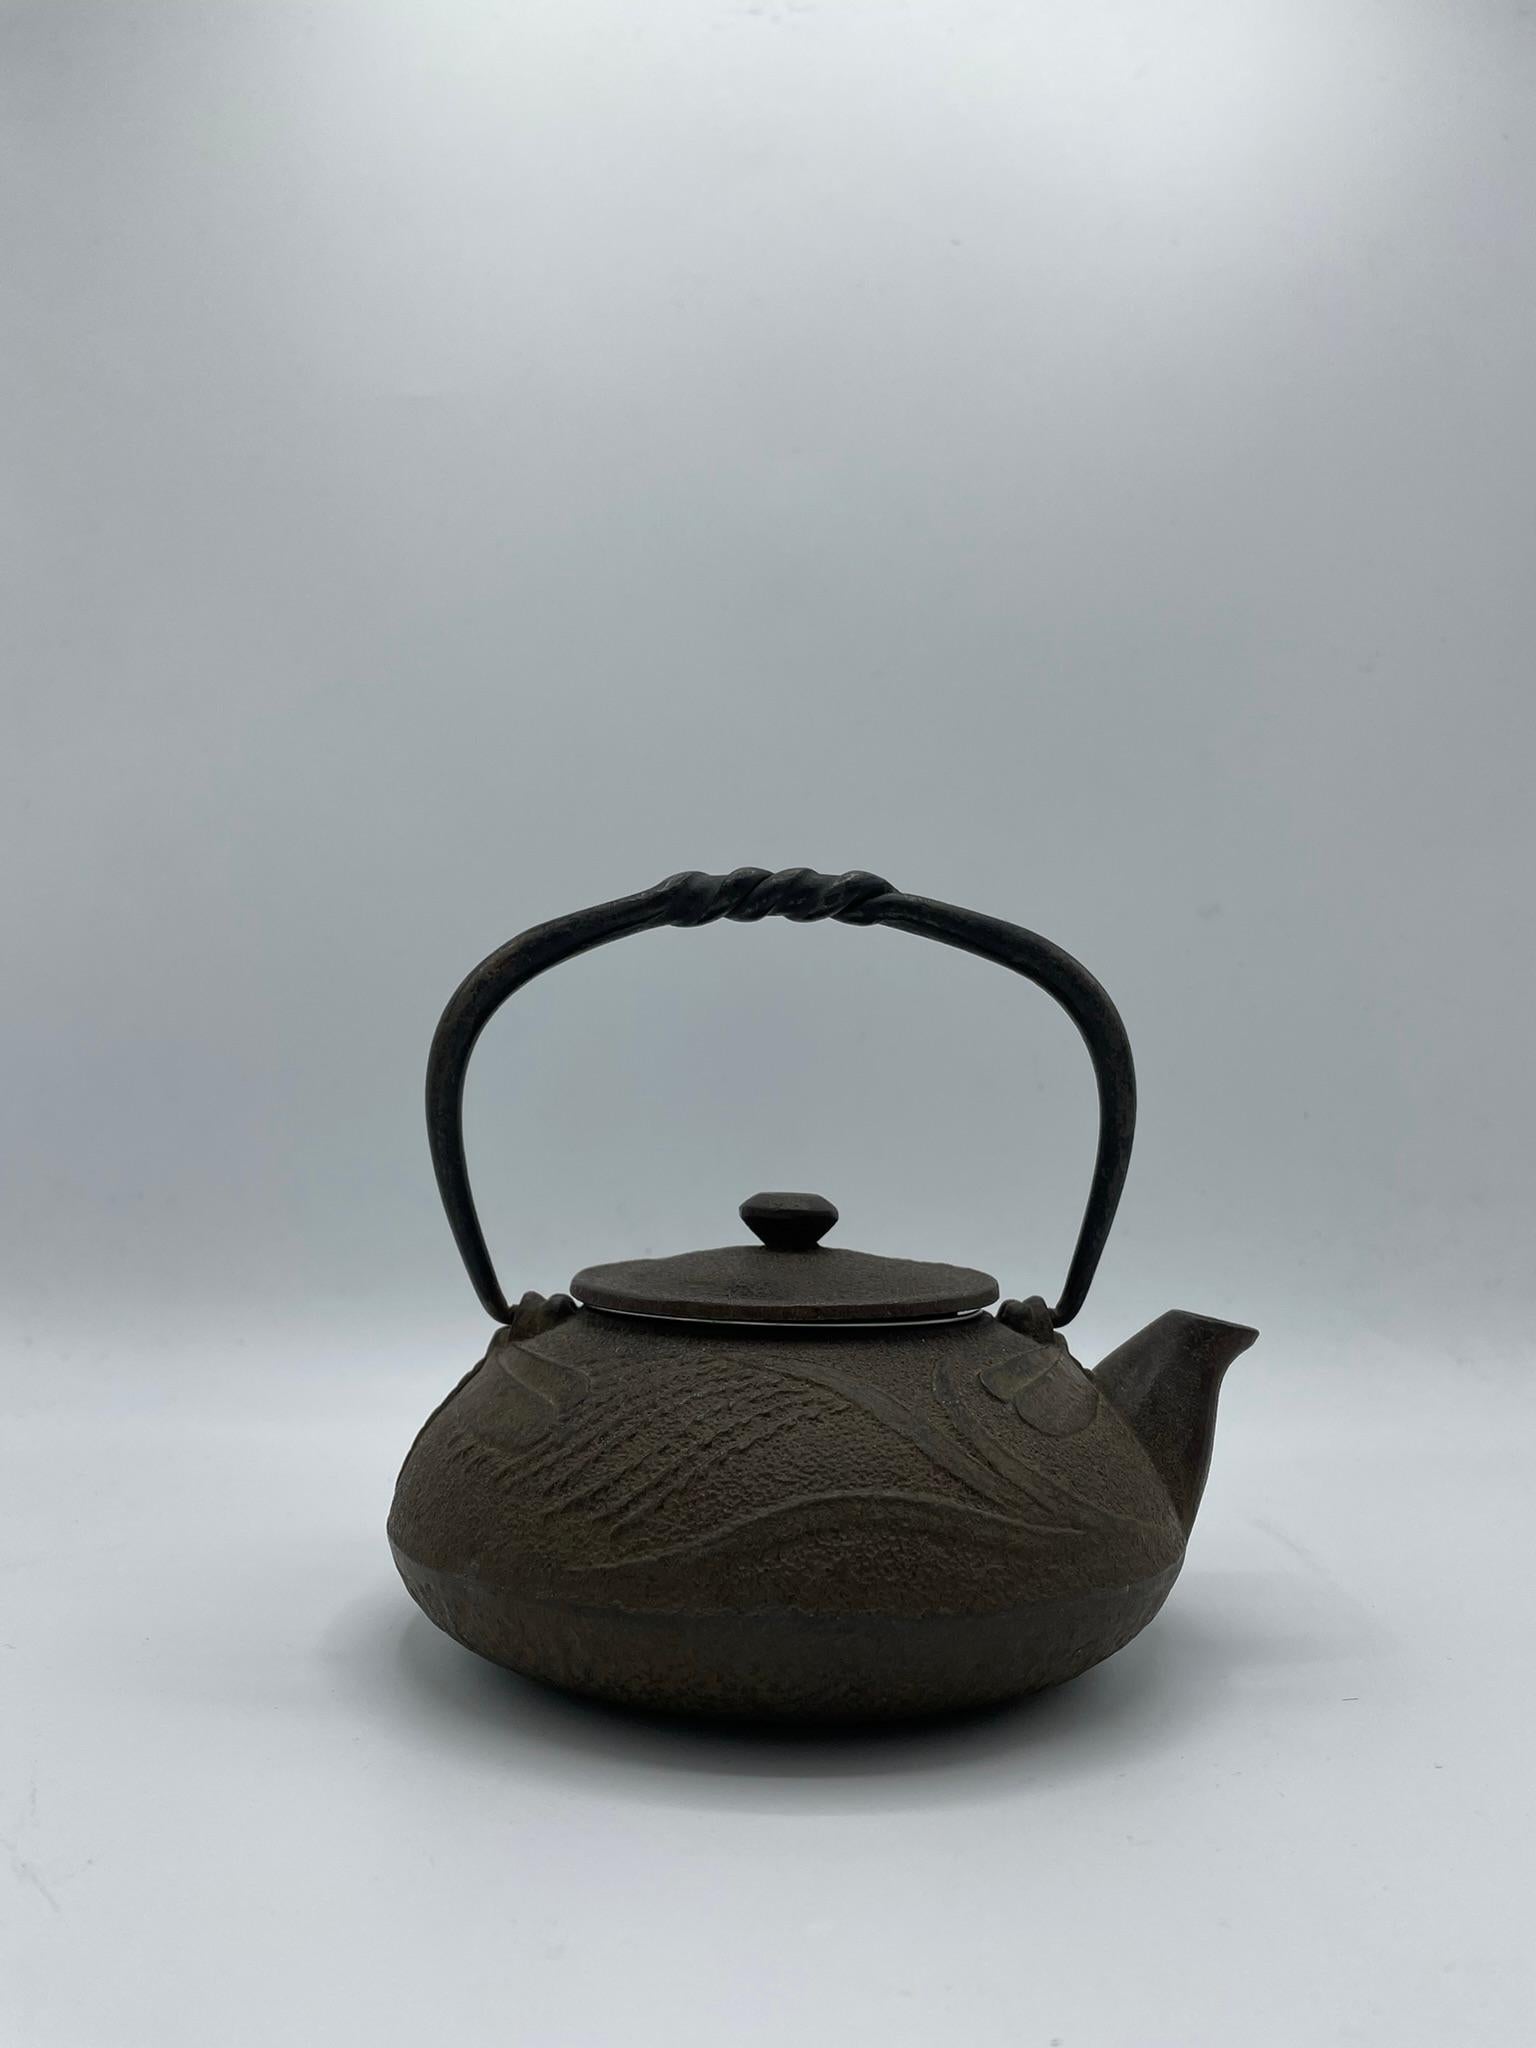 This kettle was made in 1960s, in Showa era. 
The cast iron kettles like this item are called 'Tetsubin' in Japan.
It can be put on the fire or an induction plate. Also we can use it as decoration.
Do not scratch the bottom of the kettle to leave